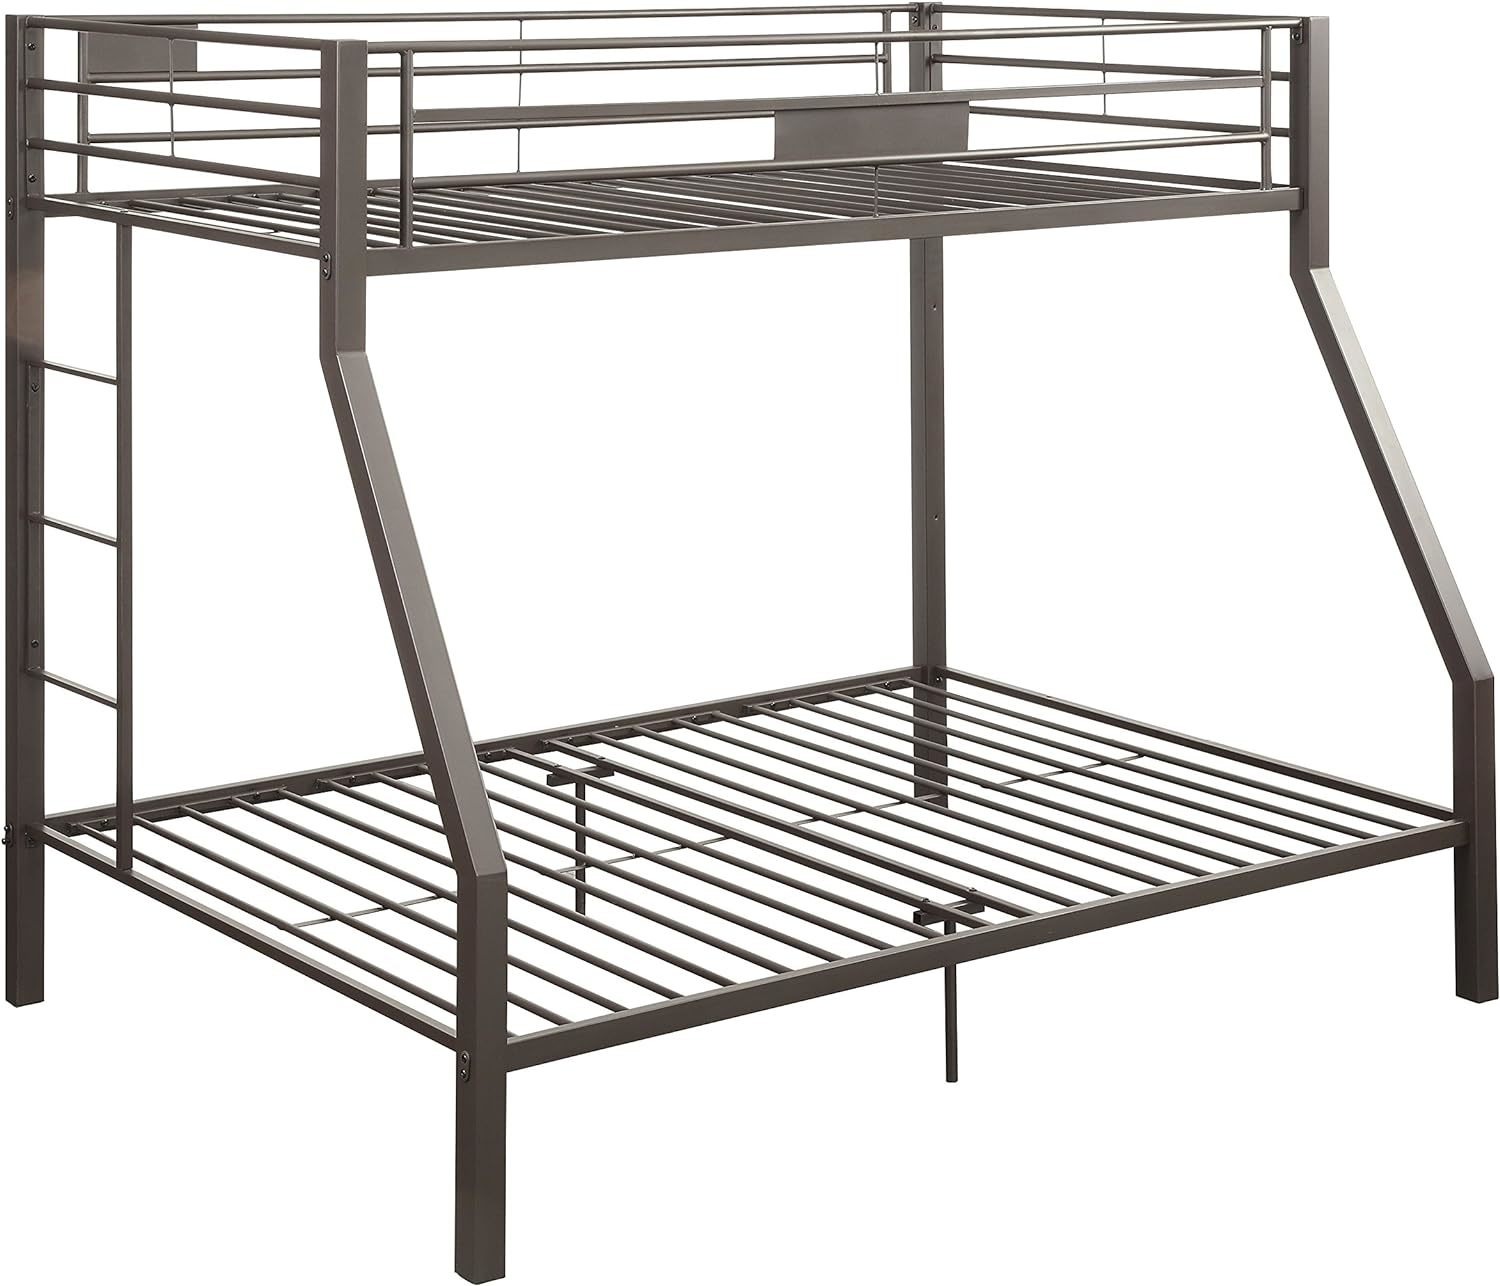 Twin Over Full Bunk Bed In Acme Limbra Brown. - $494.96